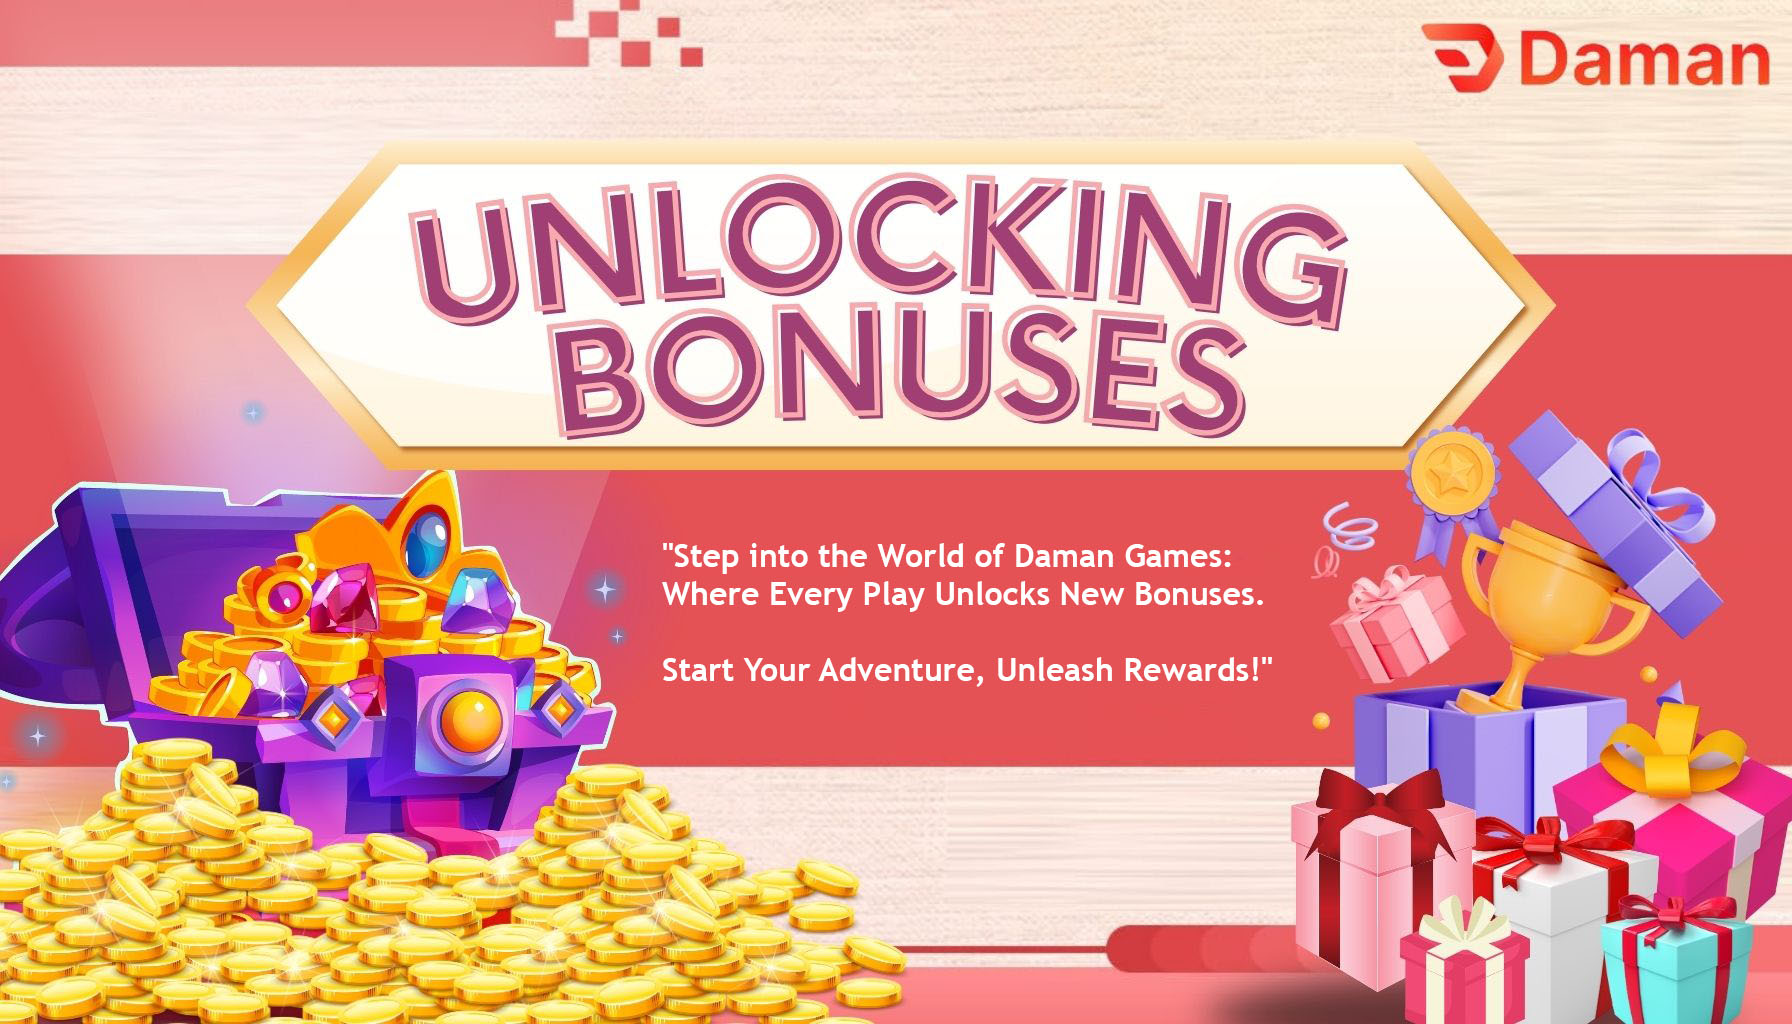 an image of how daman games is unlocking bonuses for its players different on other gaming platforms